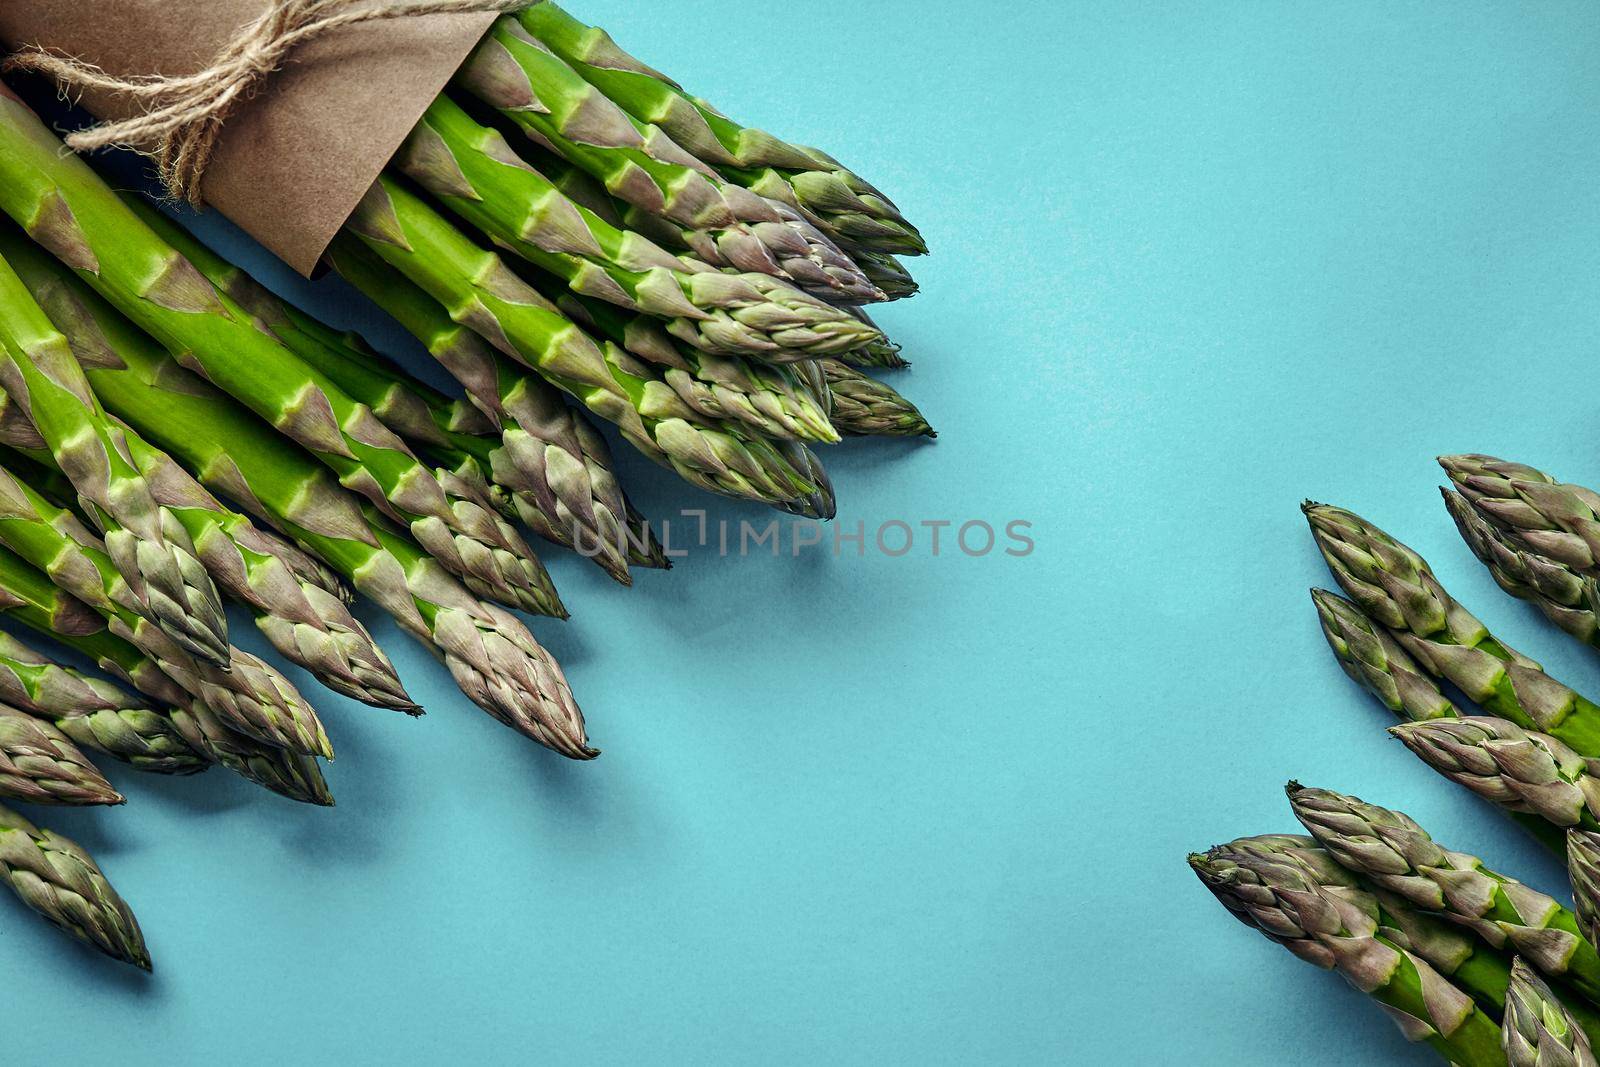 Bunch of an edible, green spears of asparagus isolated on blue background. Fresh vegetables, top view. Healthy eating. Spring harvest, agricultural farming concept.